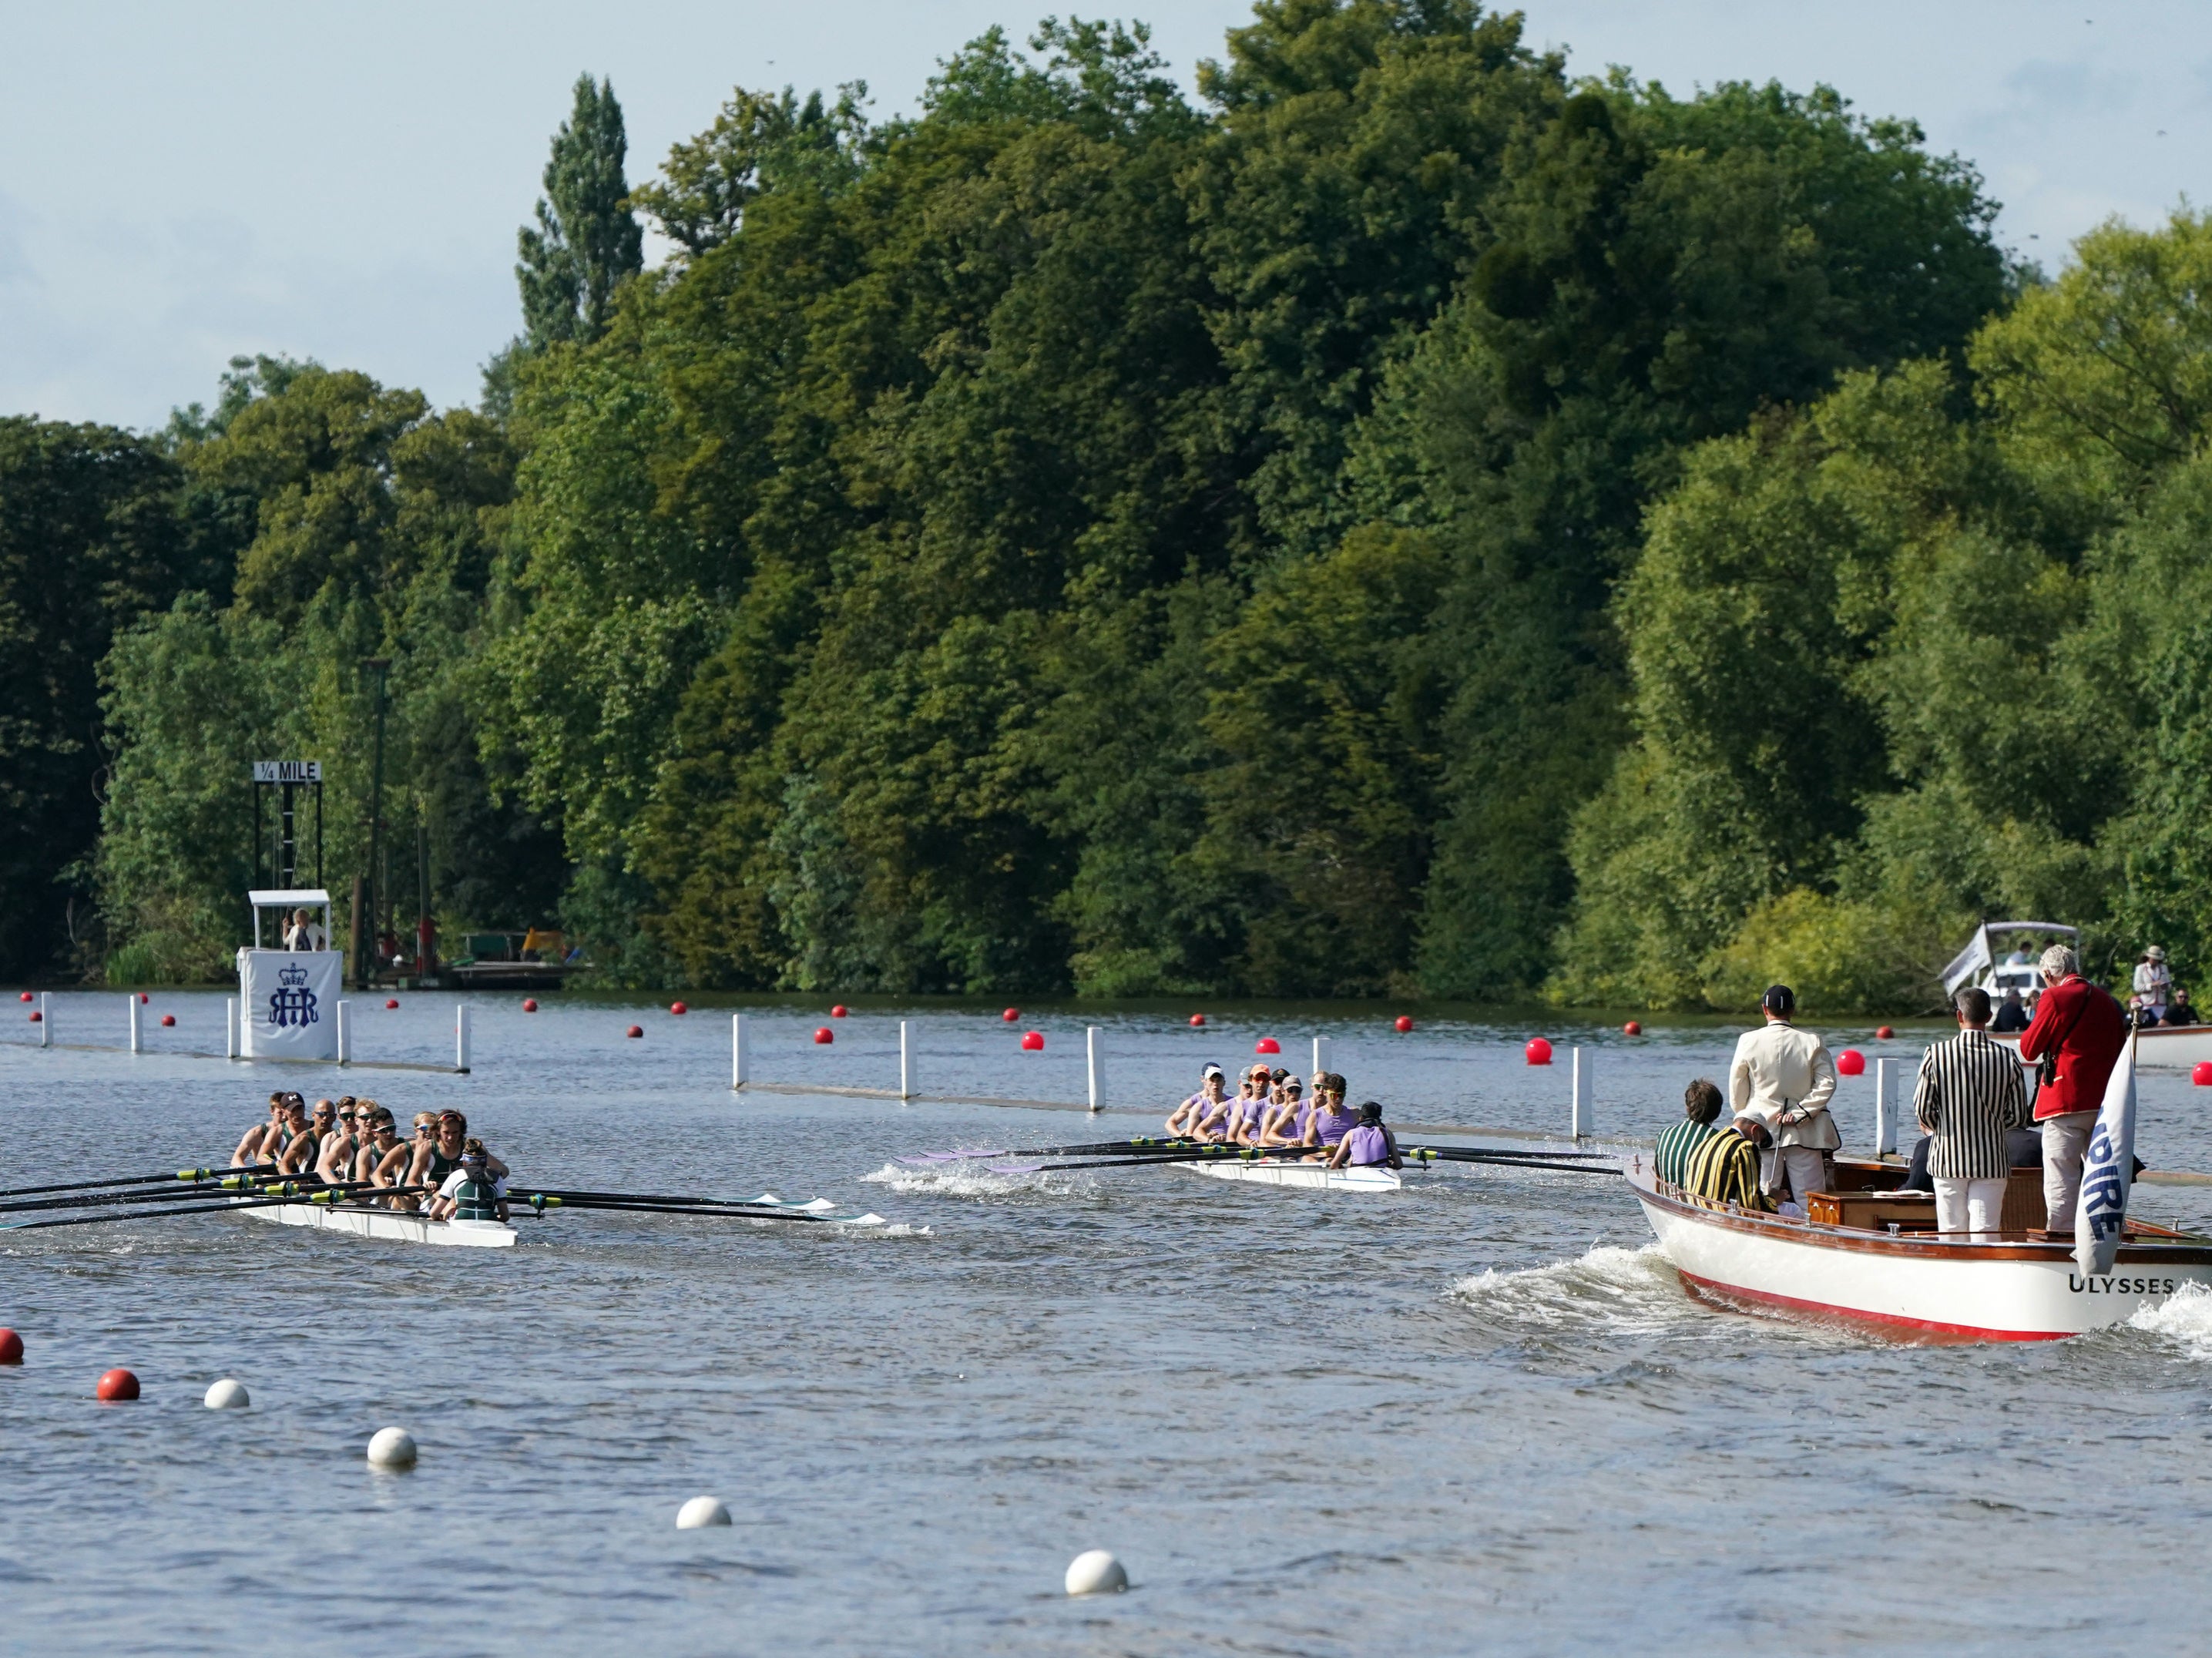 Two rowing crews compete on the opening day of the 2021 Henley Royal Regatta alongside the river Thames